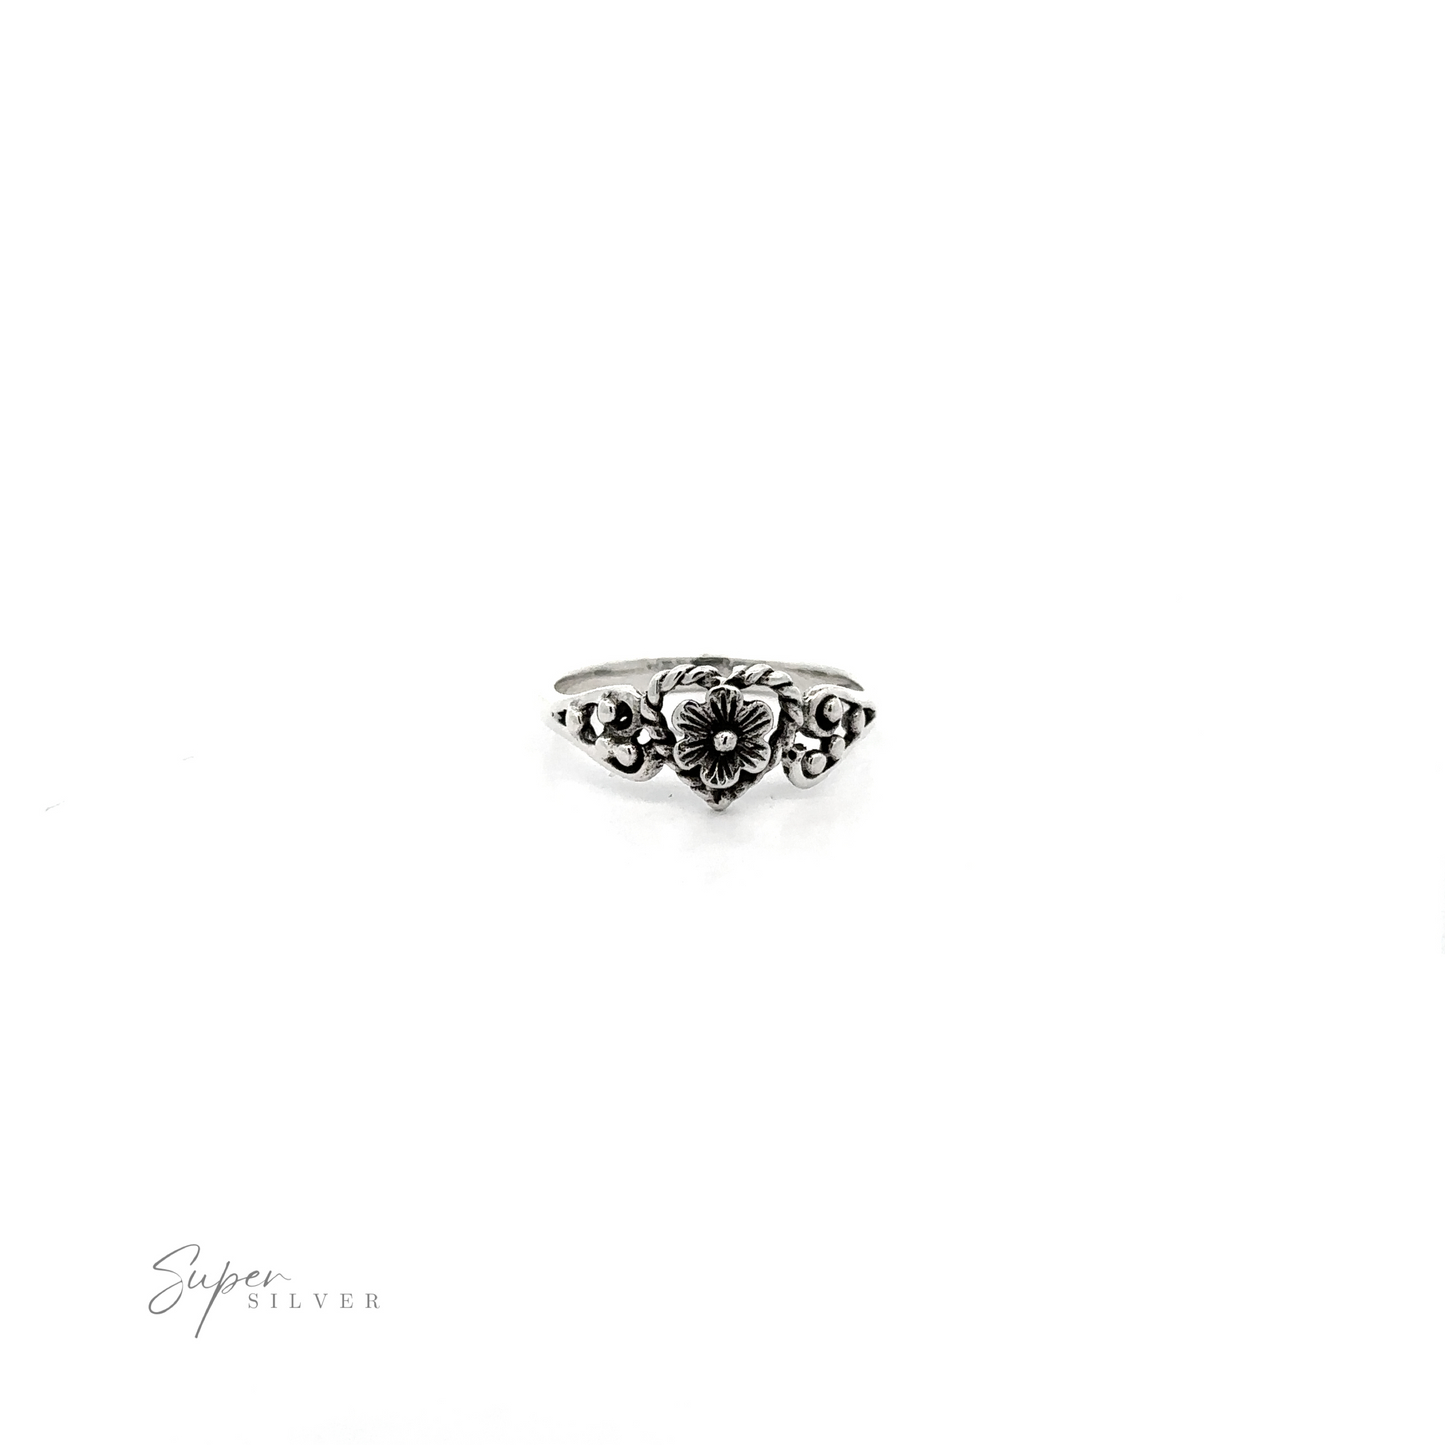 Twisted Heart Outline Ring with Floral Detailing displayed centrally on a white background with the text "super silver" at the bottom.